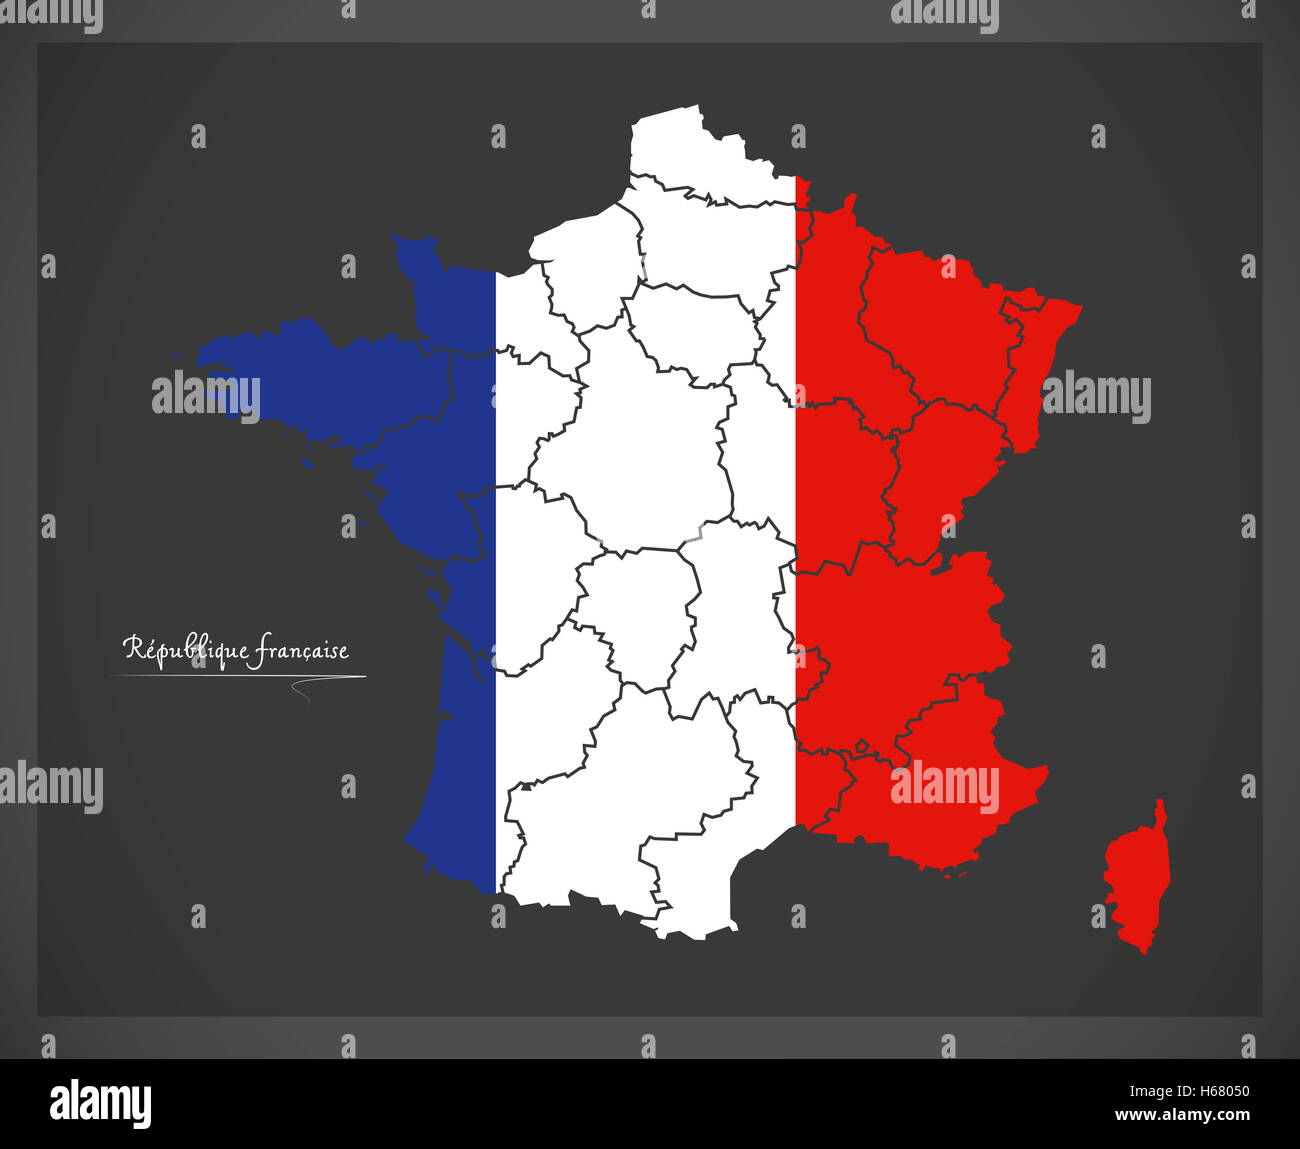 France map artwork with national colors illustration Stock Photo